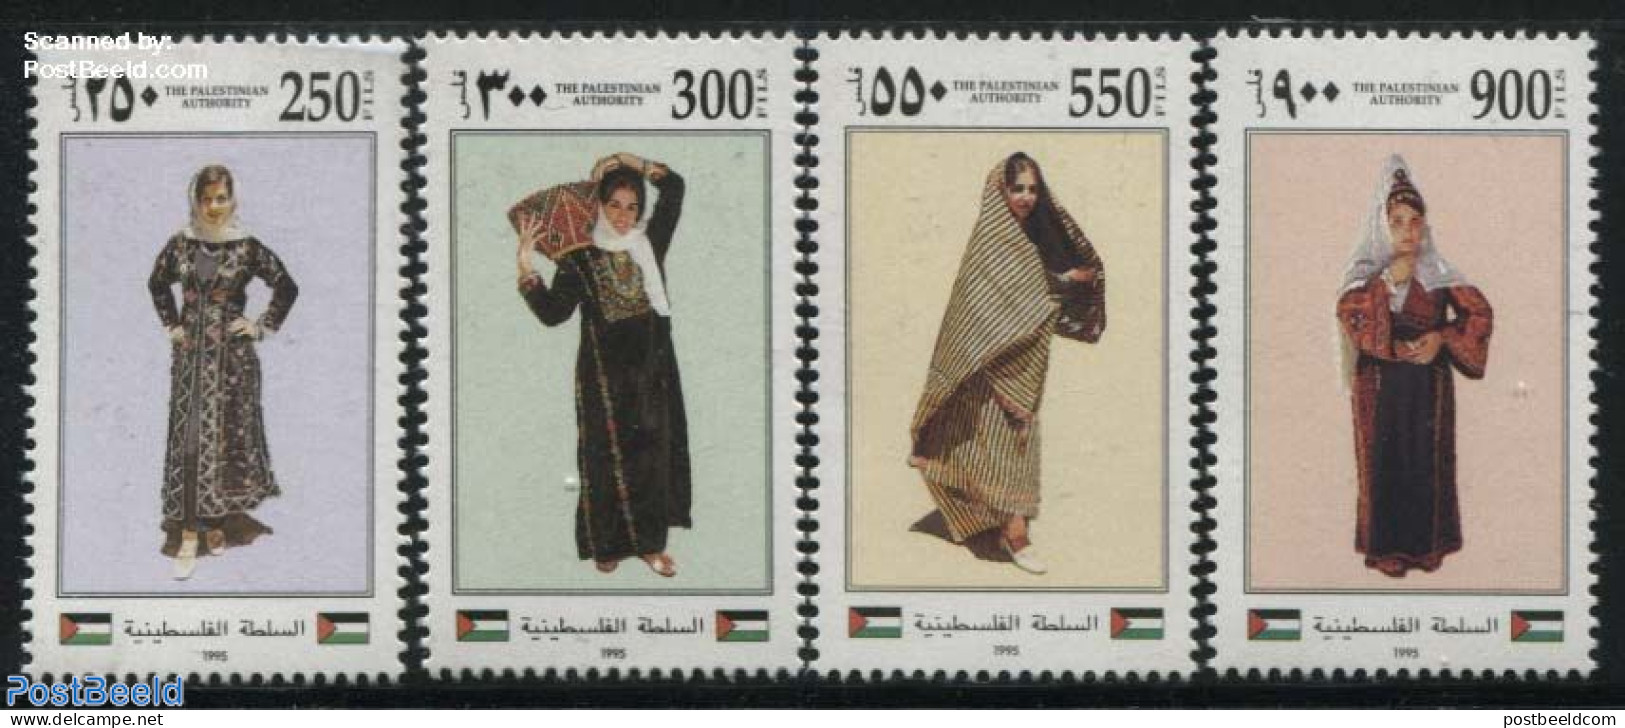 Palestinian Terr. 1995 Costumes 4v, Mint NH, Various - Costumes - Kostums